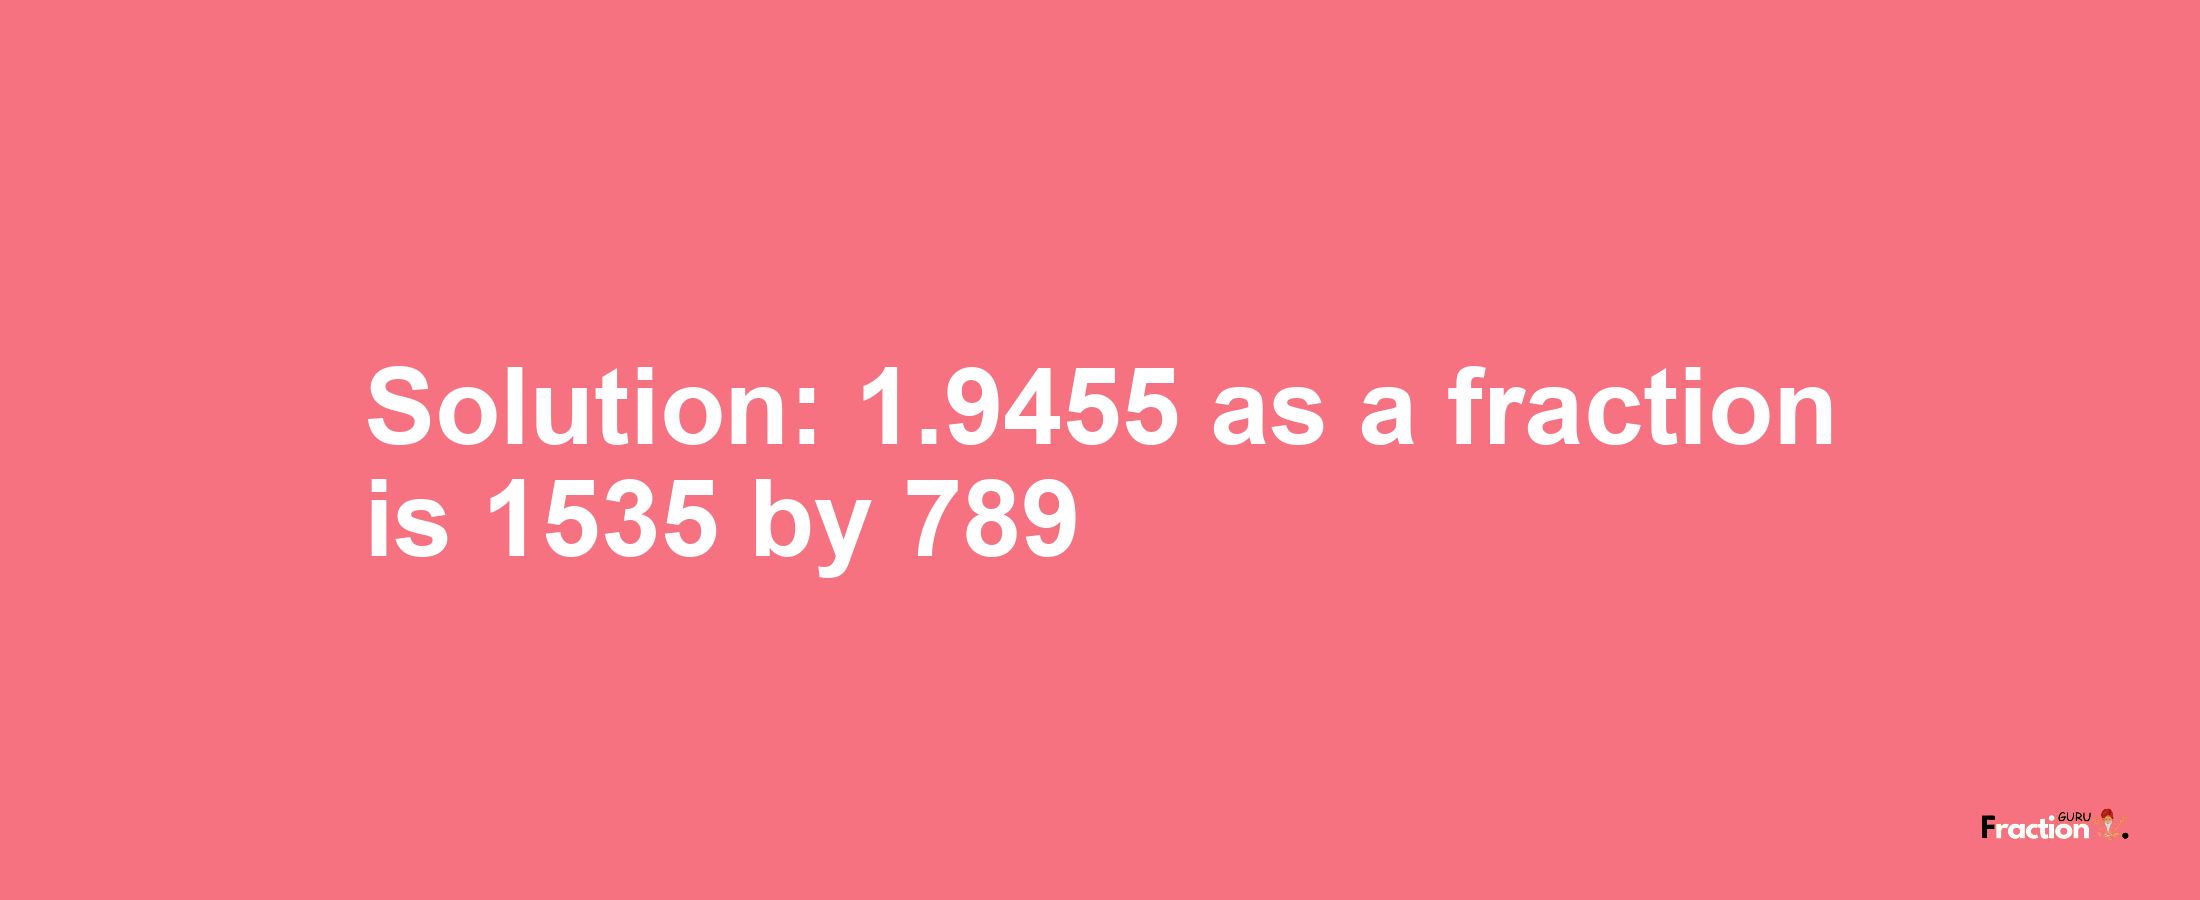 Solution:1.9455 as a fraction is 1535/789